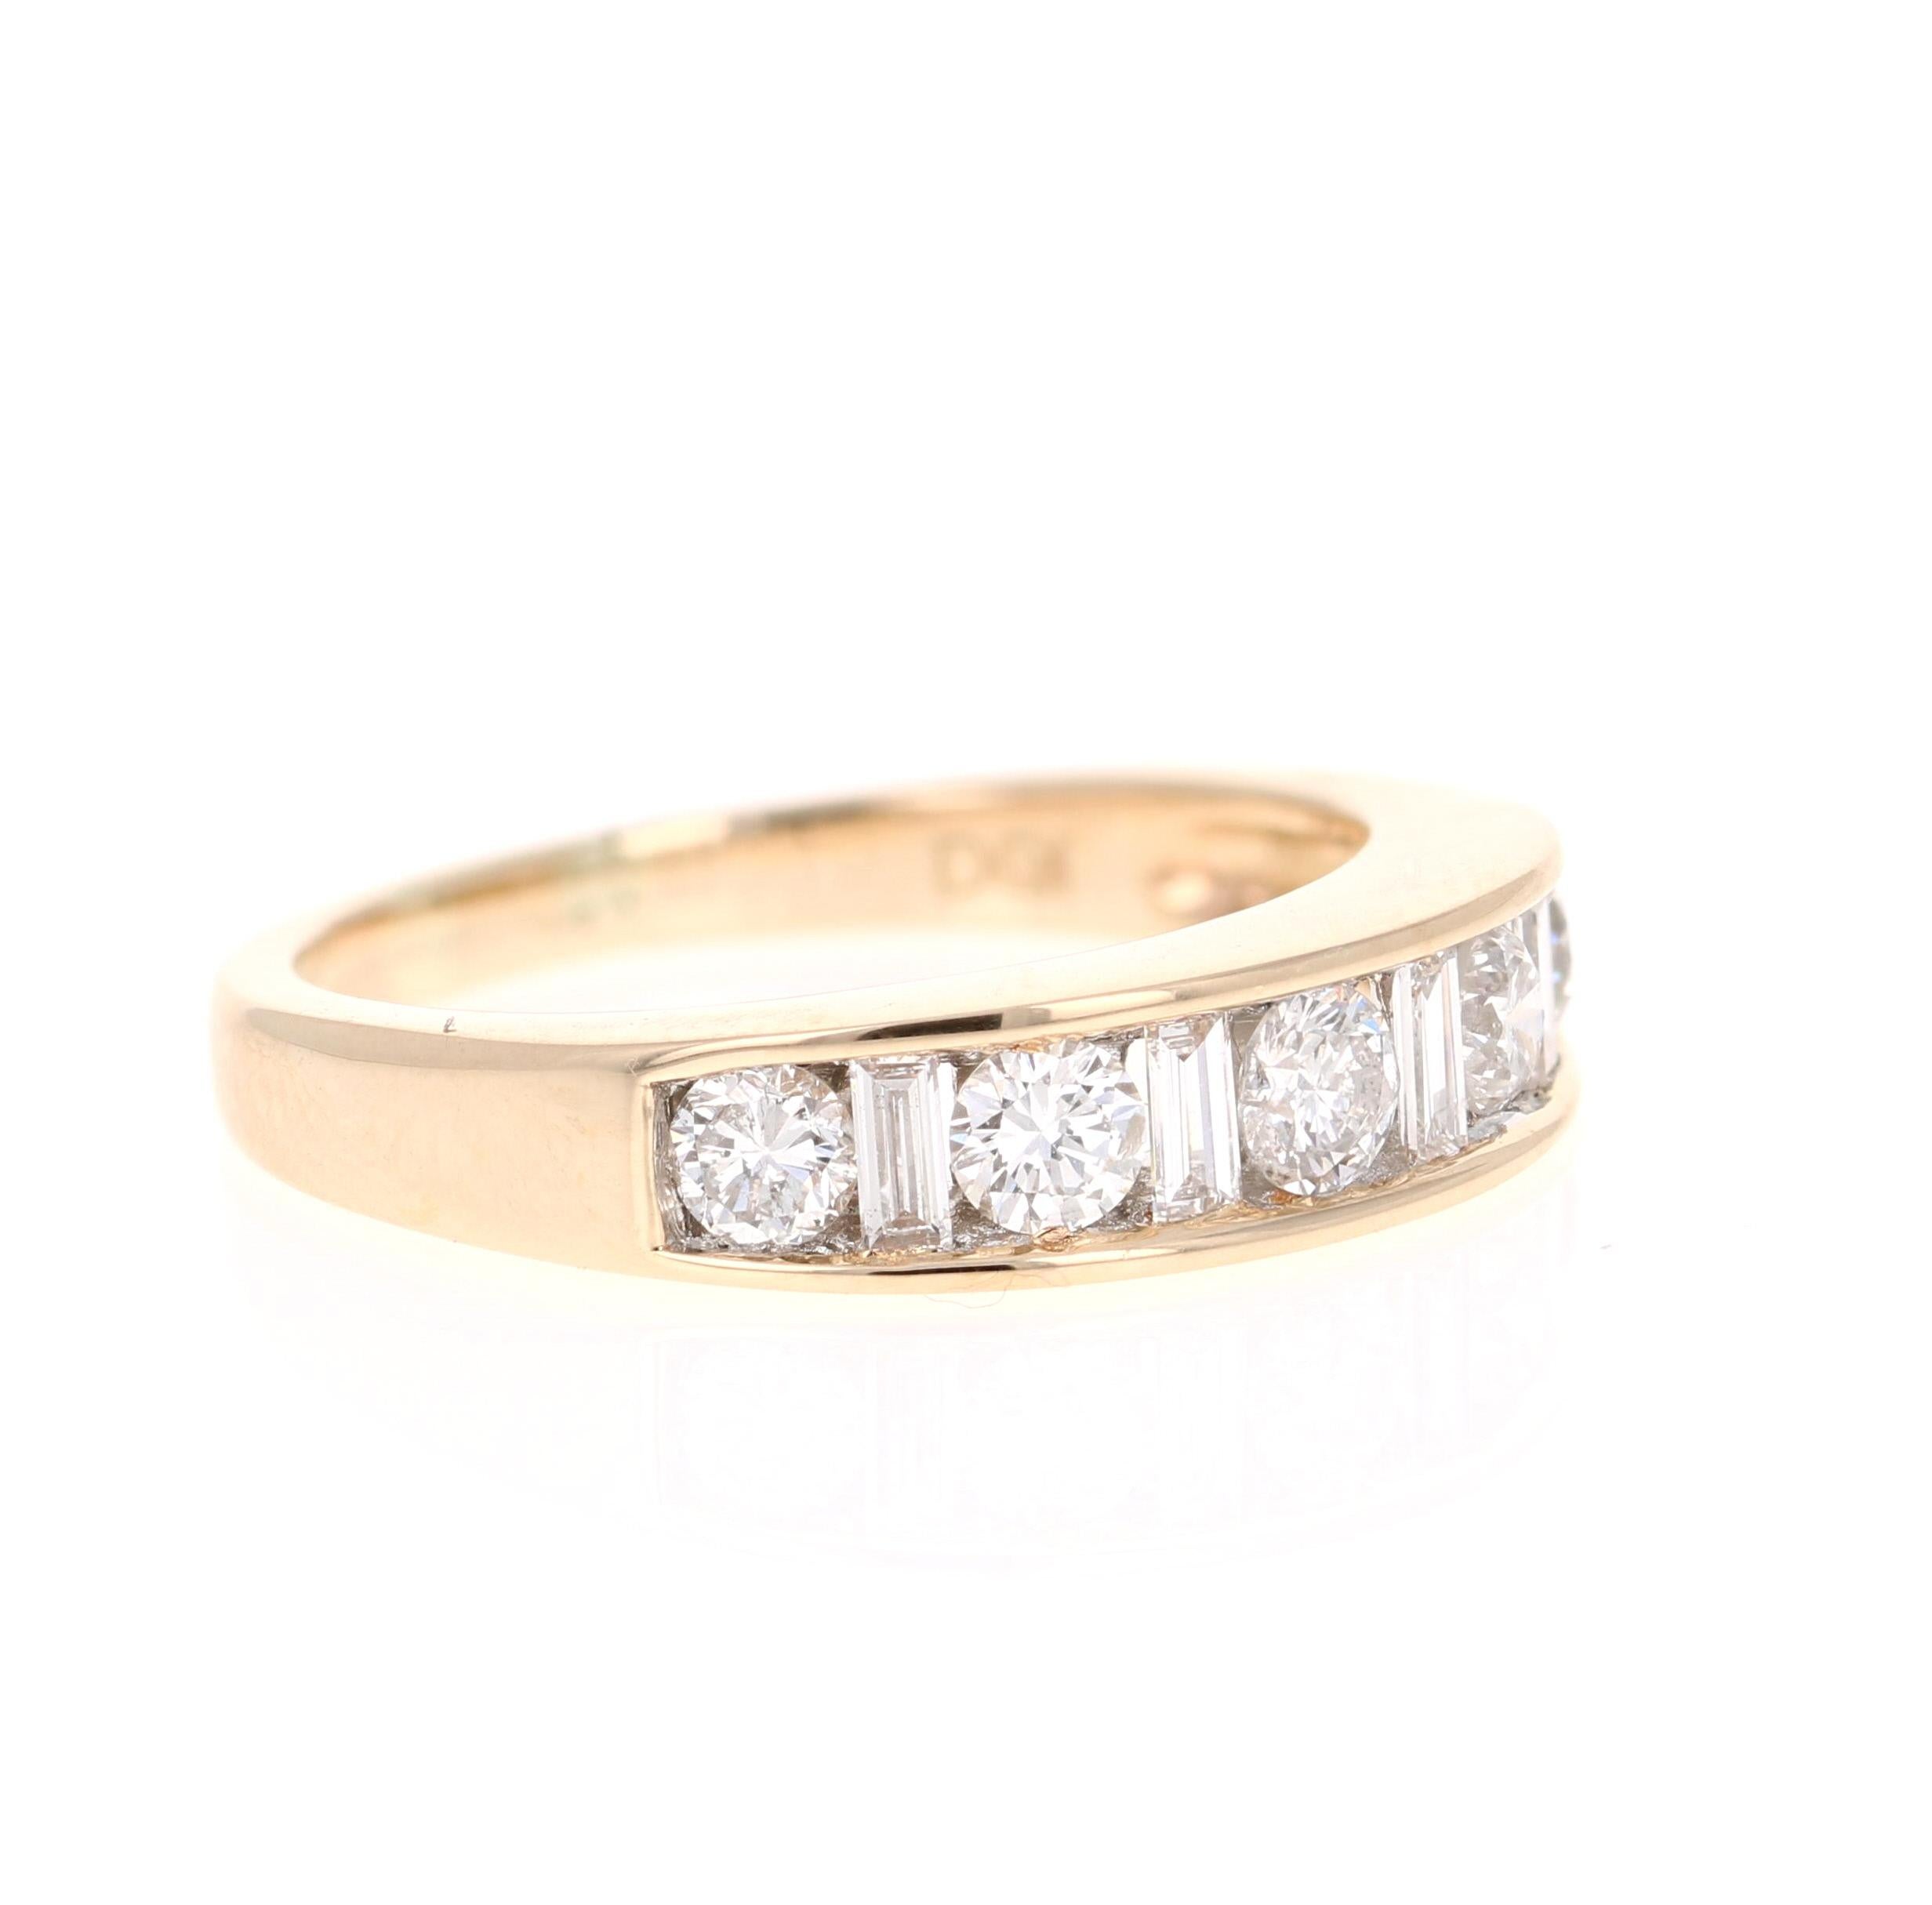 
Unique and Beautiful Diamond Band! 

This band has 5 Round Cut Diamonds weighing 0.60 Carats and 6 Baguette Cut Diamonds weighing 0.20 Carats. The total carat weight of the band is 0.80 Carats. 

The ring is set in 14 Karat Yellow Gold and weighs